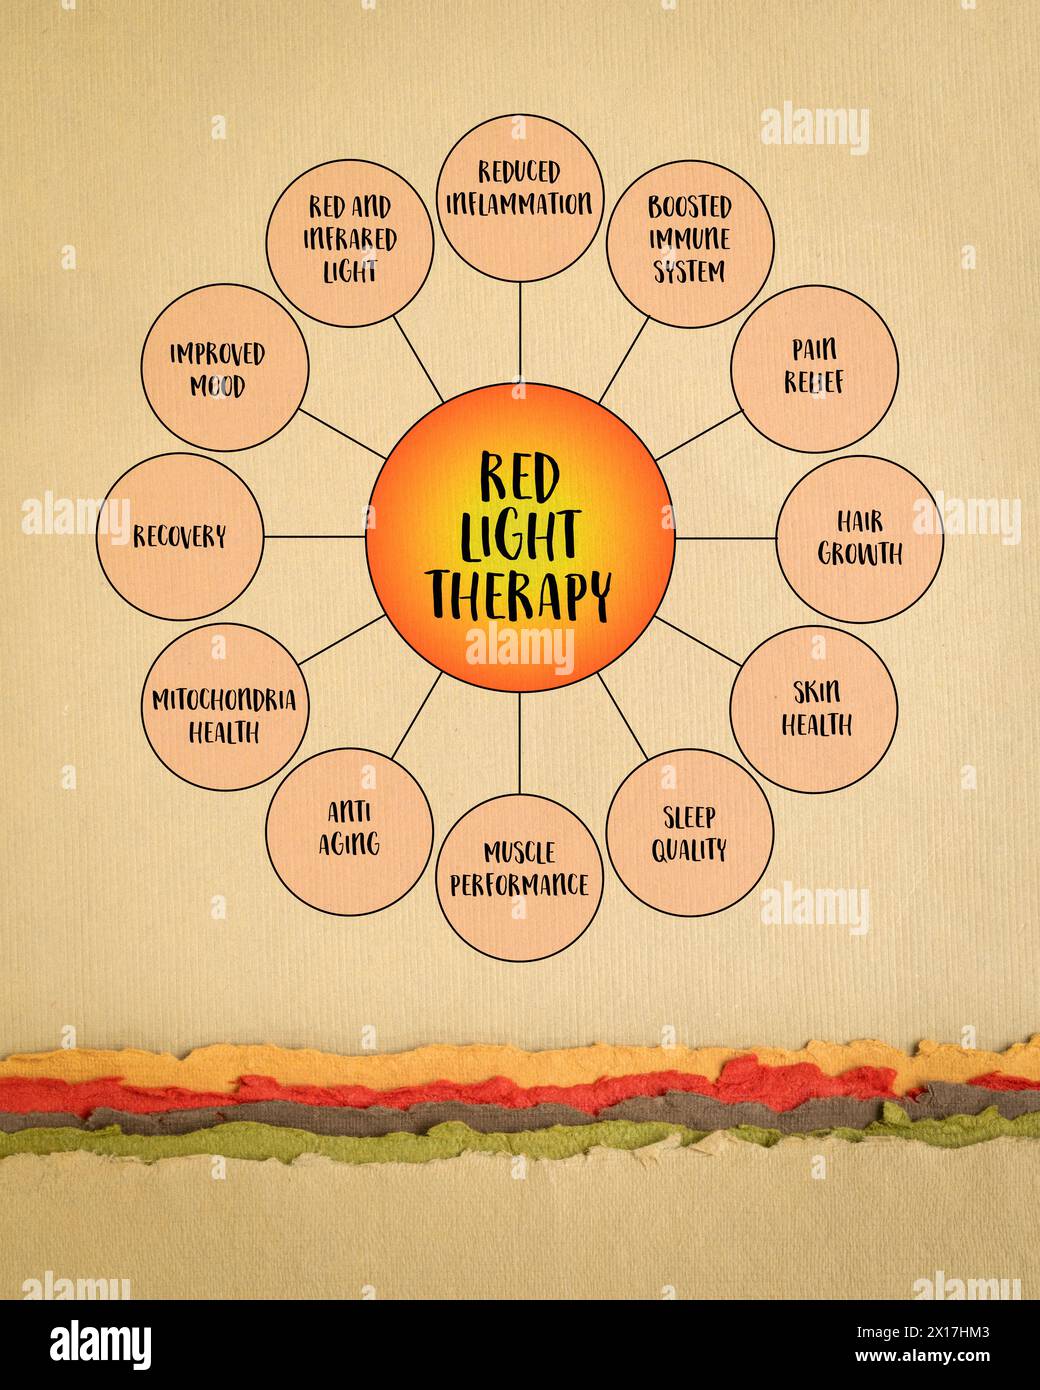 benefits of red light therapy - mind map infographics diagram on art paper, health, lifestyle, self care and medical concept Stock Photo